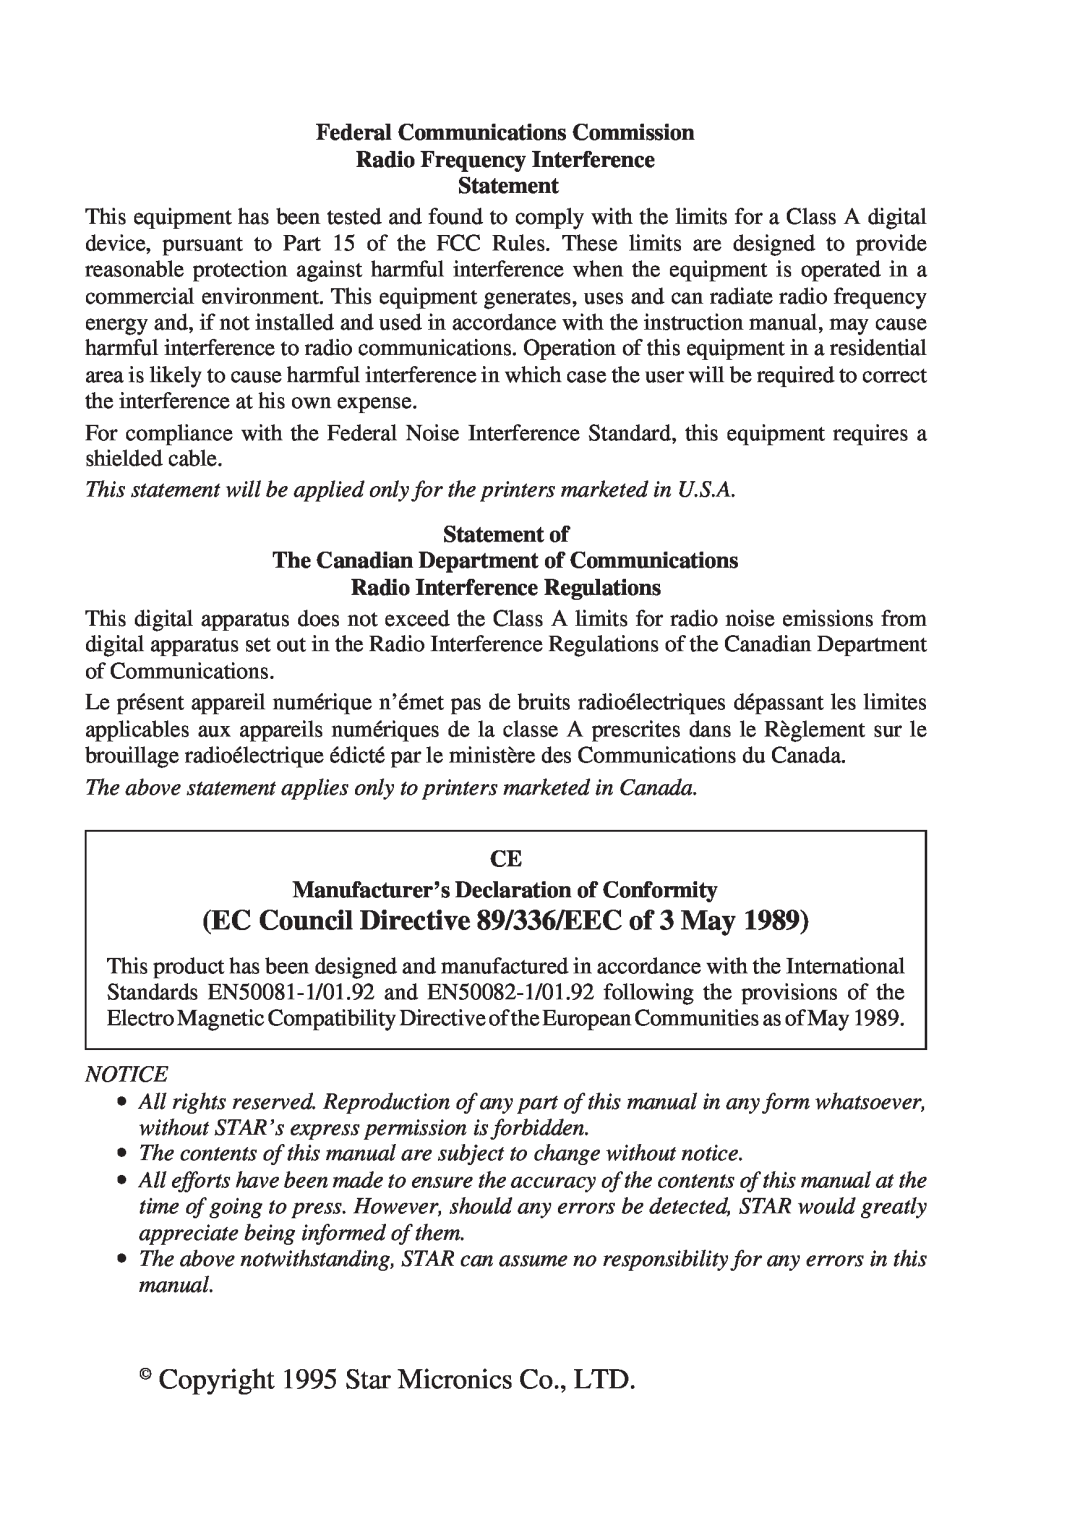 Star Micronics TSP400 Series EC Council Directive 89/336/EEC of 3 May, Statement, Radio Interference Regulations 